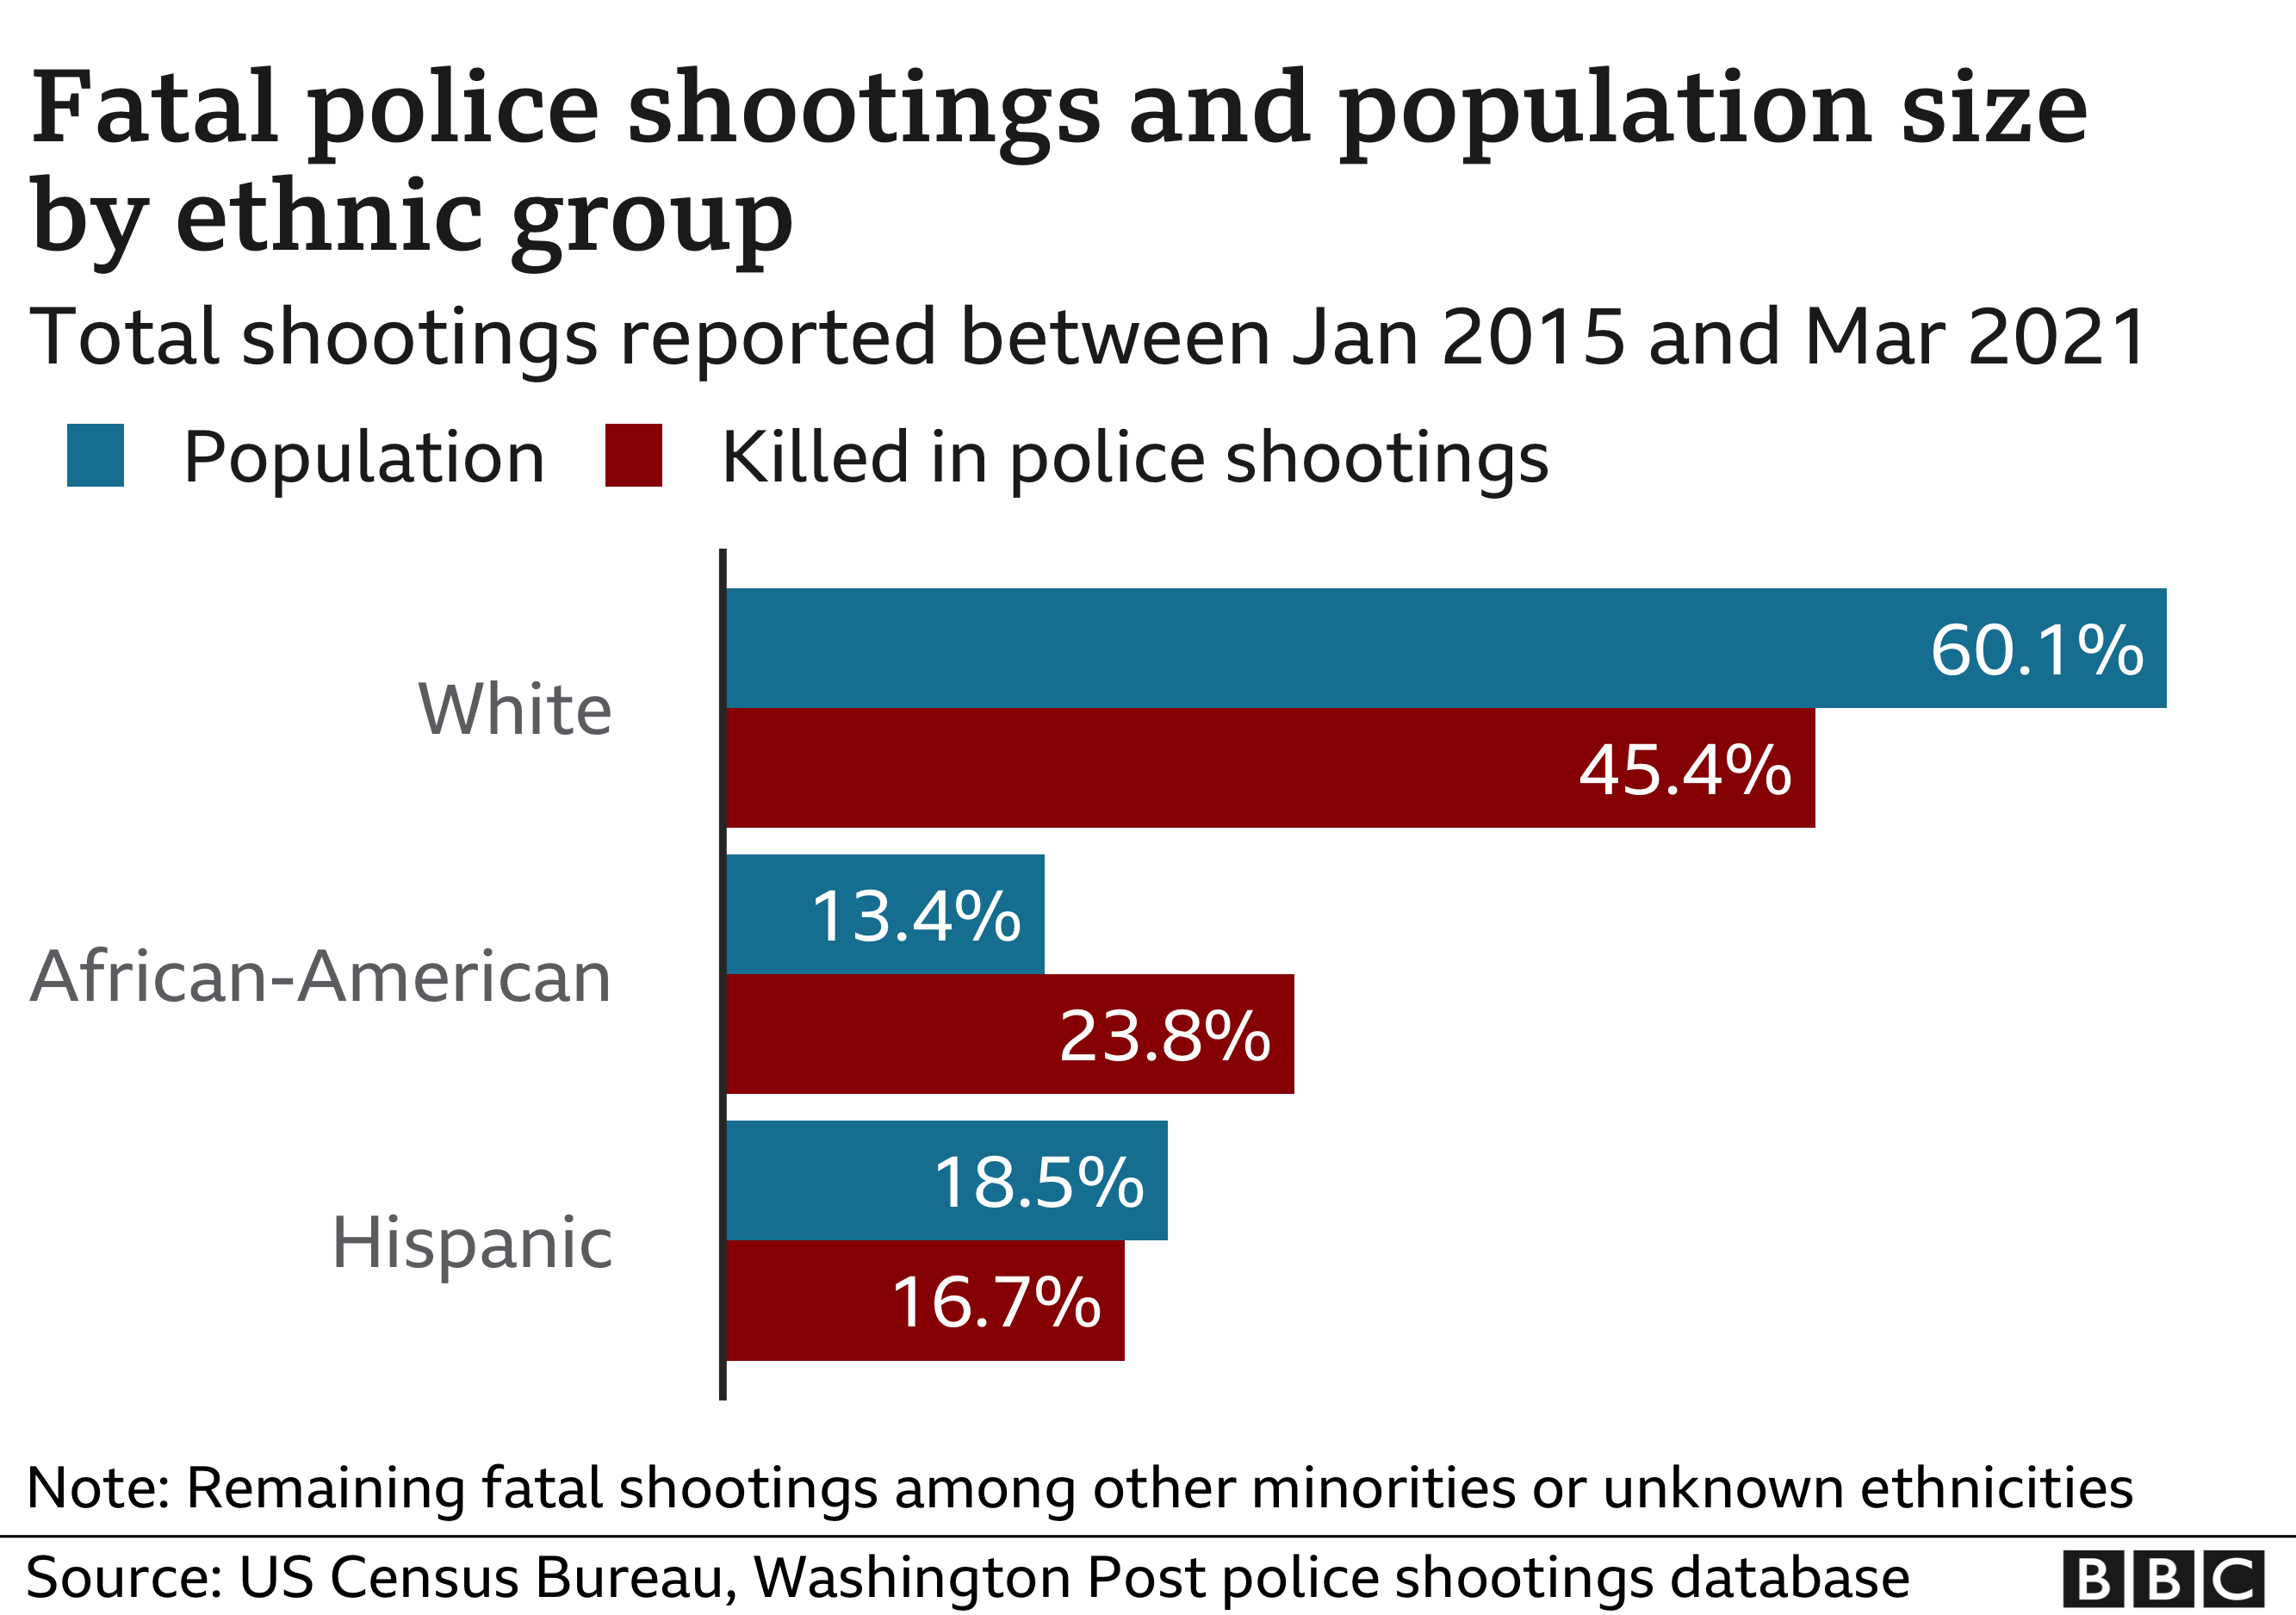 Chart showing fatal police shootings by race from January 2015 to March 2021.